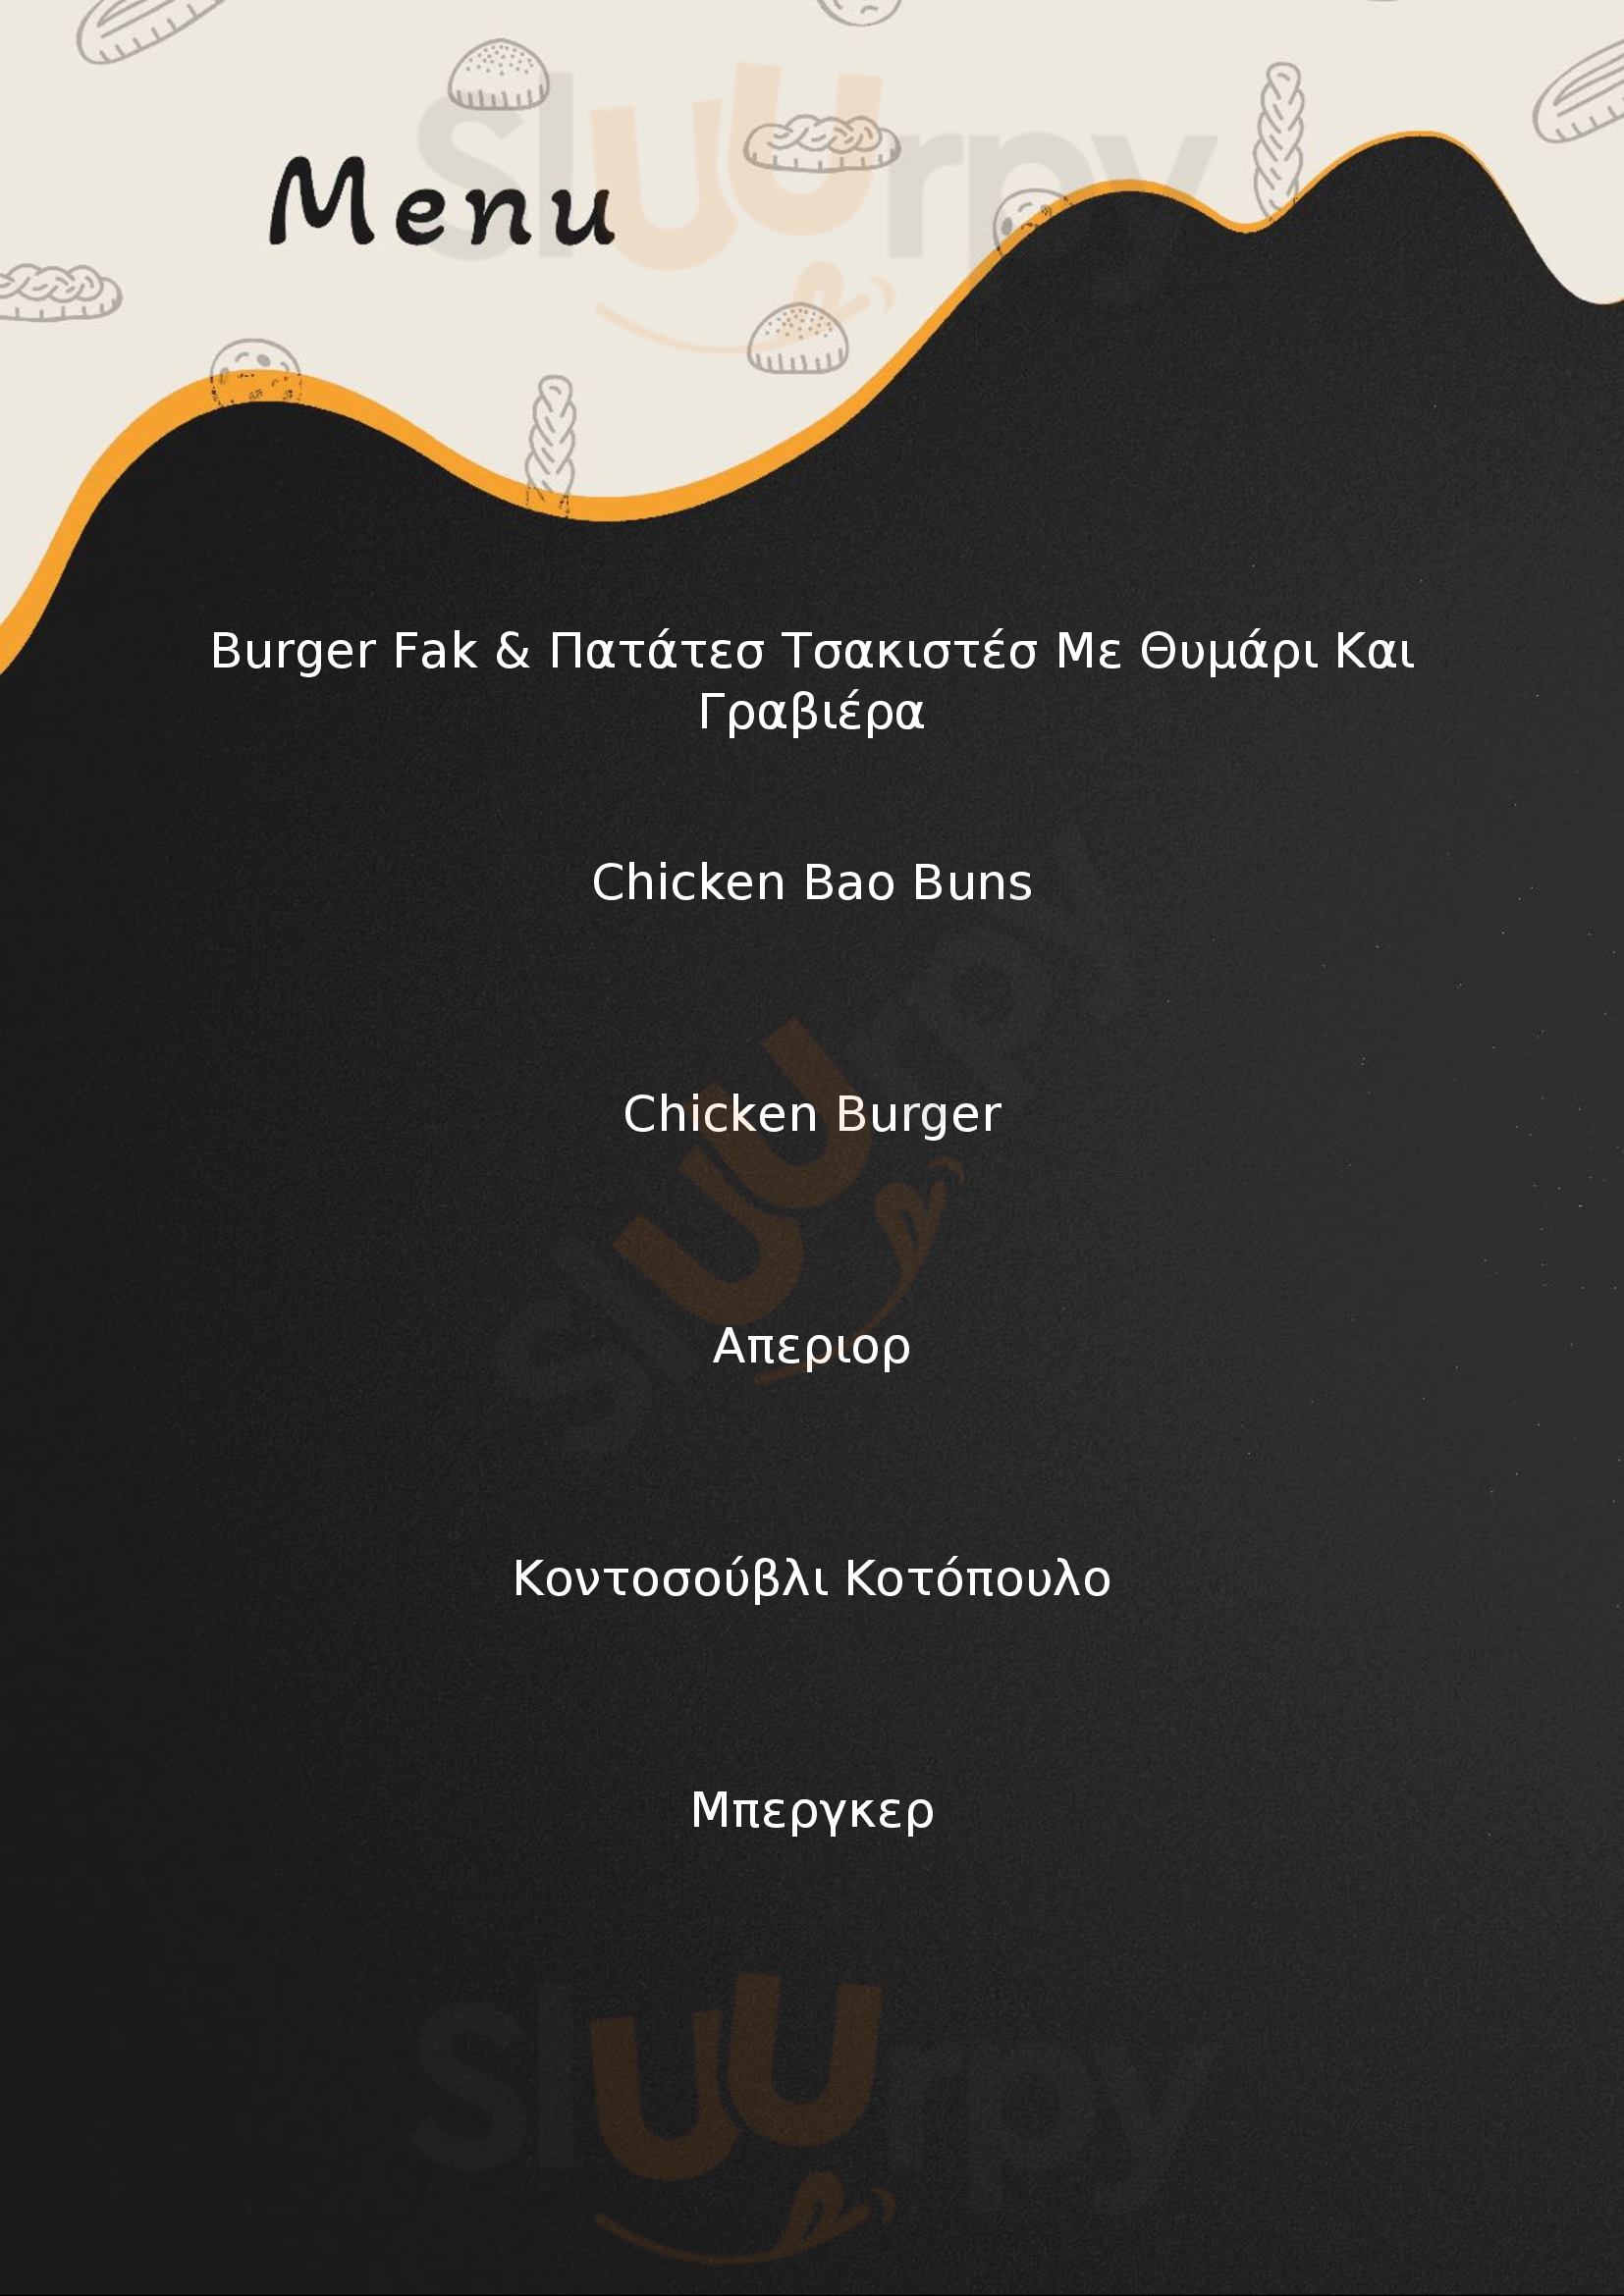 Food And Knowledge Ιωάννινα Menu - 1